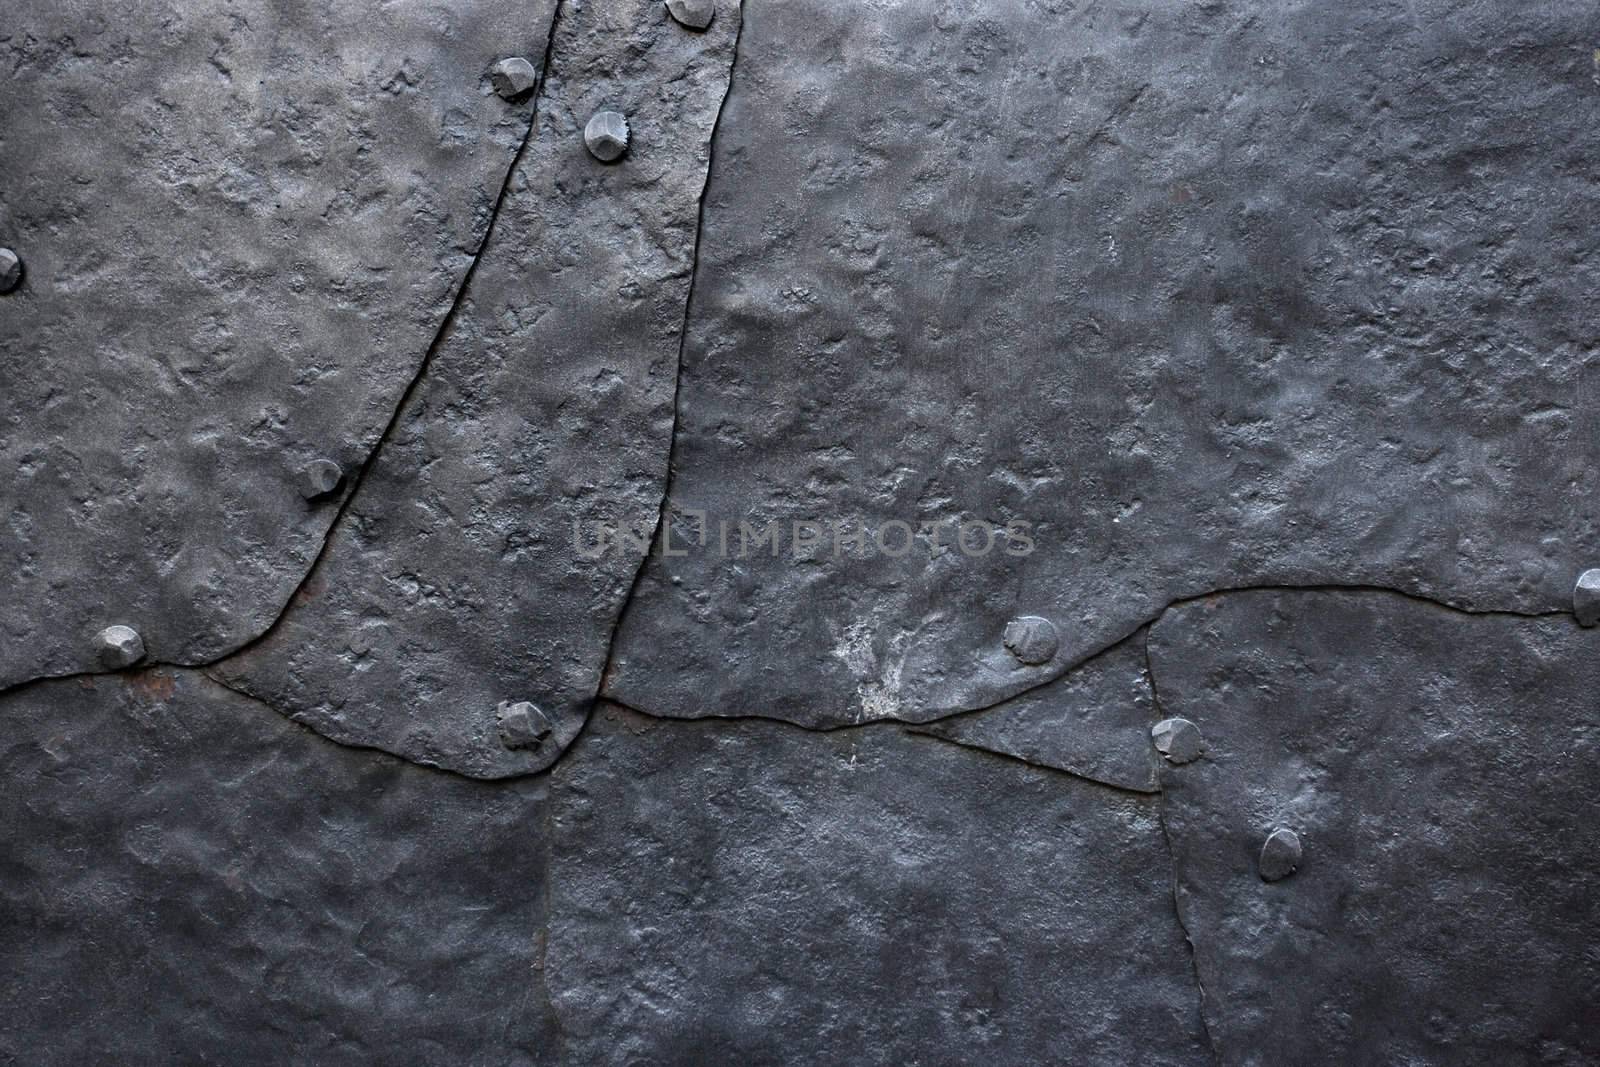 Background/industrial image of hammered metal plates with old rivets.
